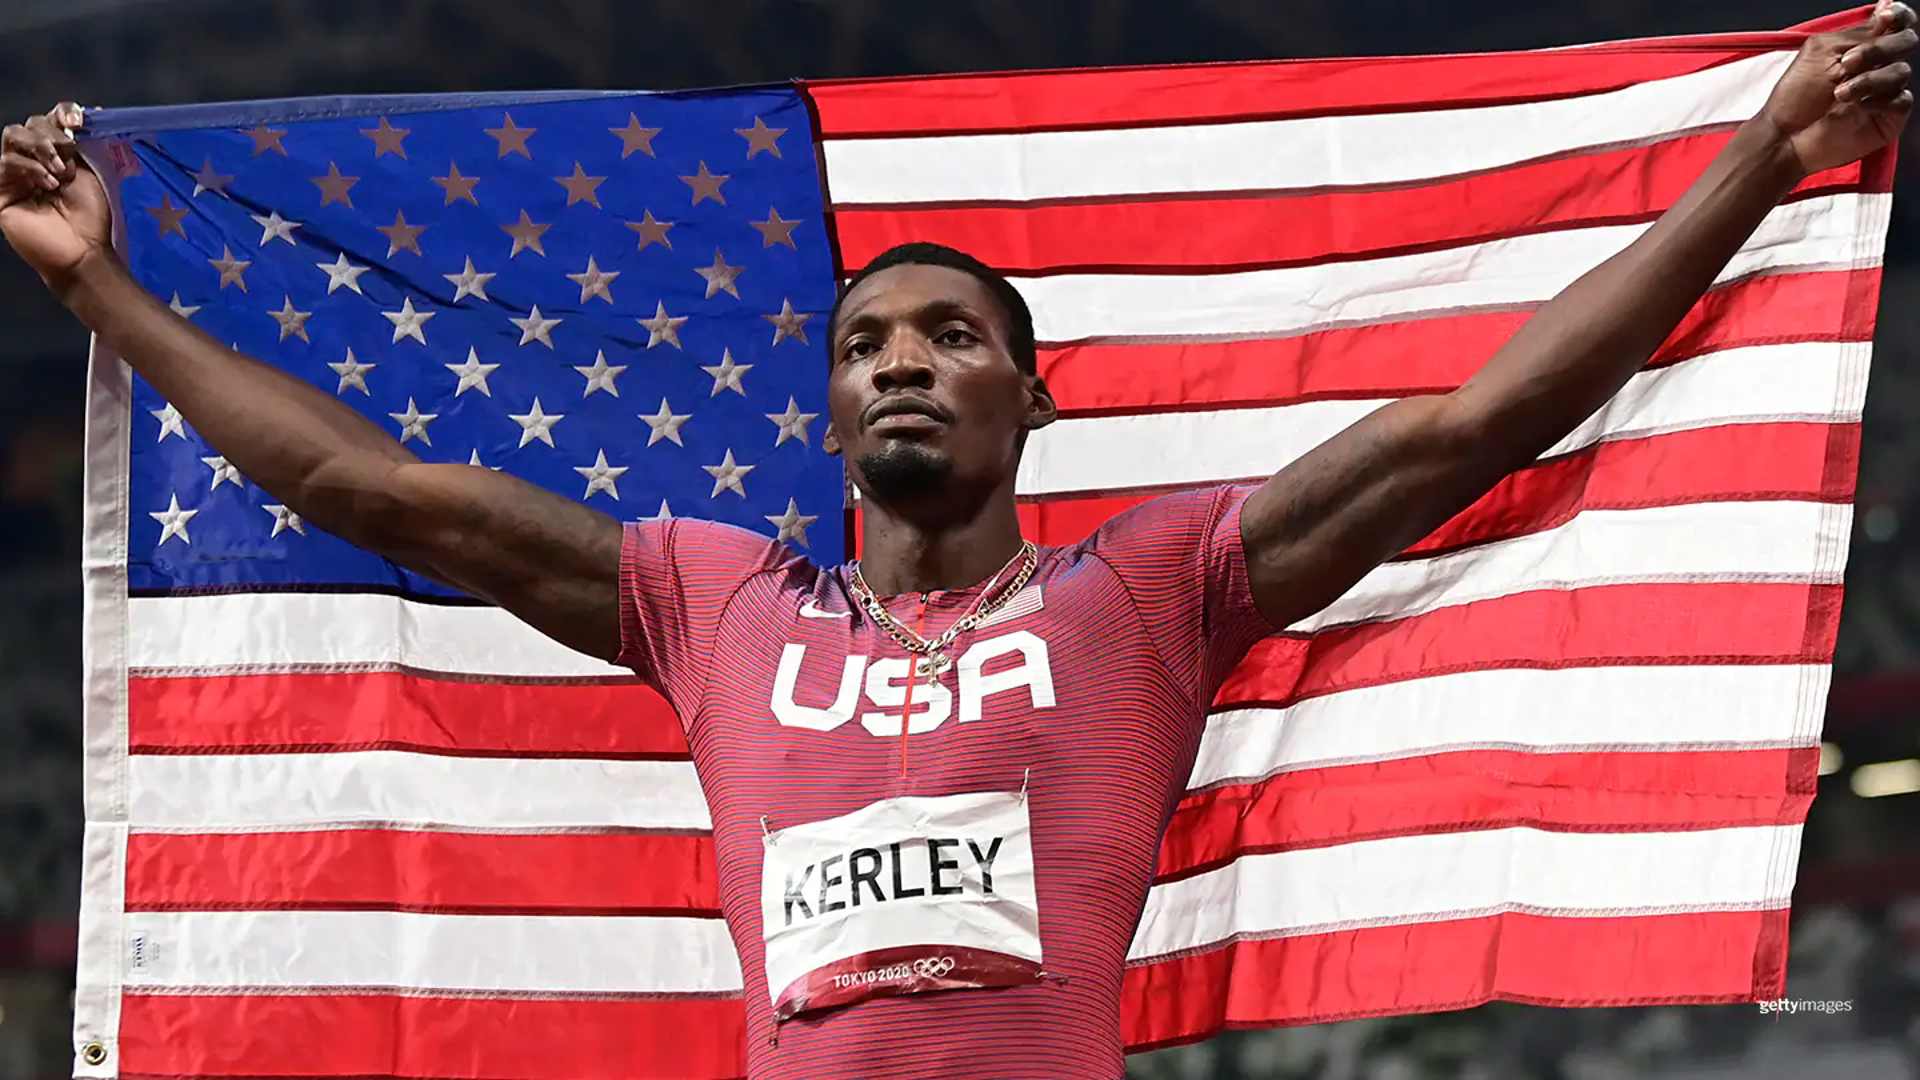 Fred Kerley holding the United States flag (Image Credits - Team USA)